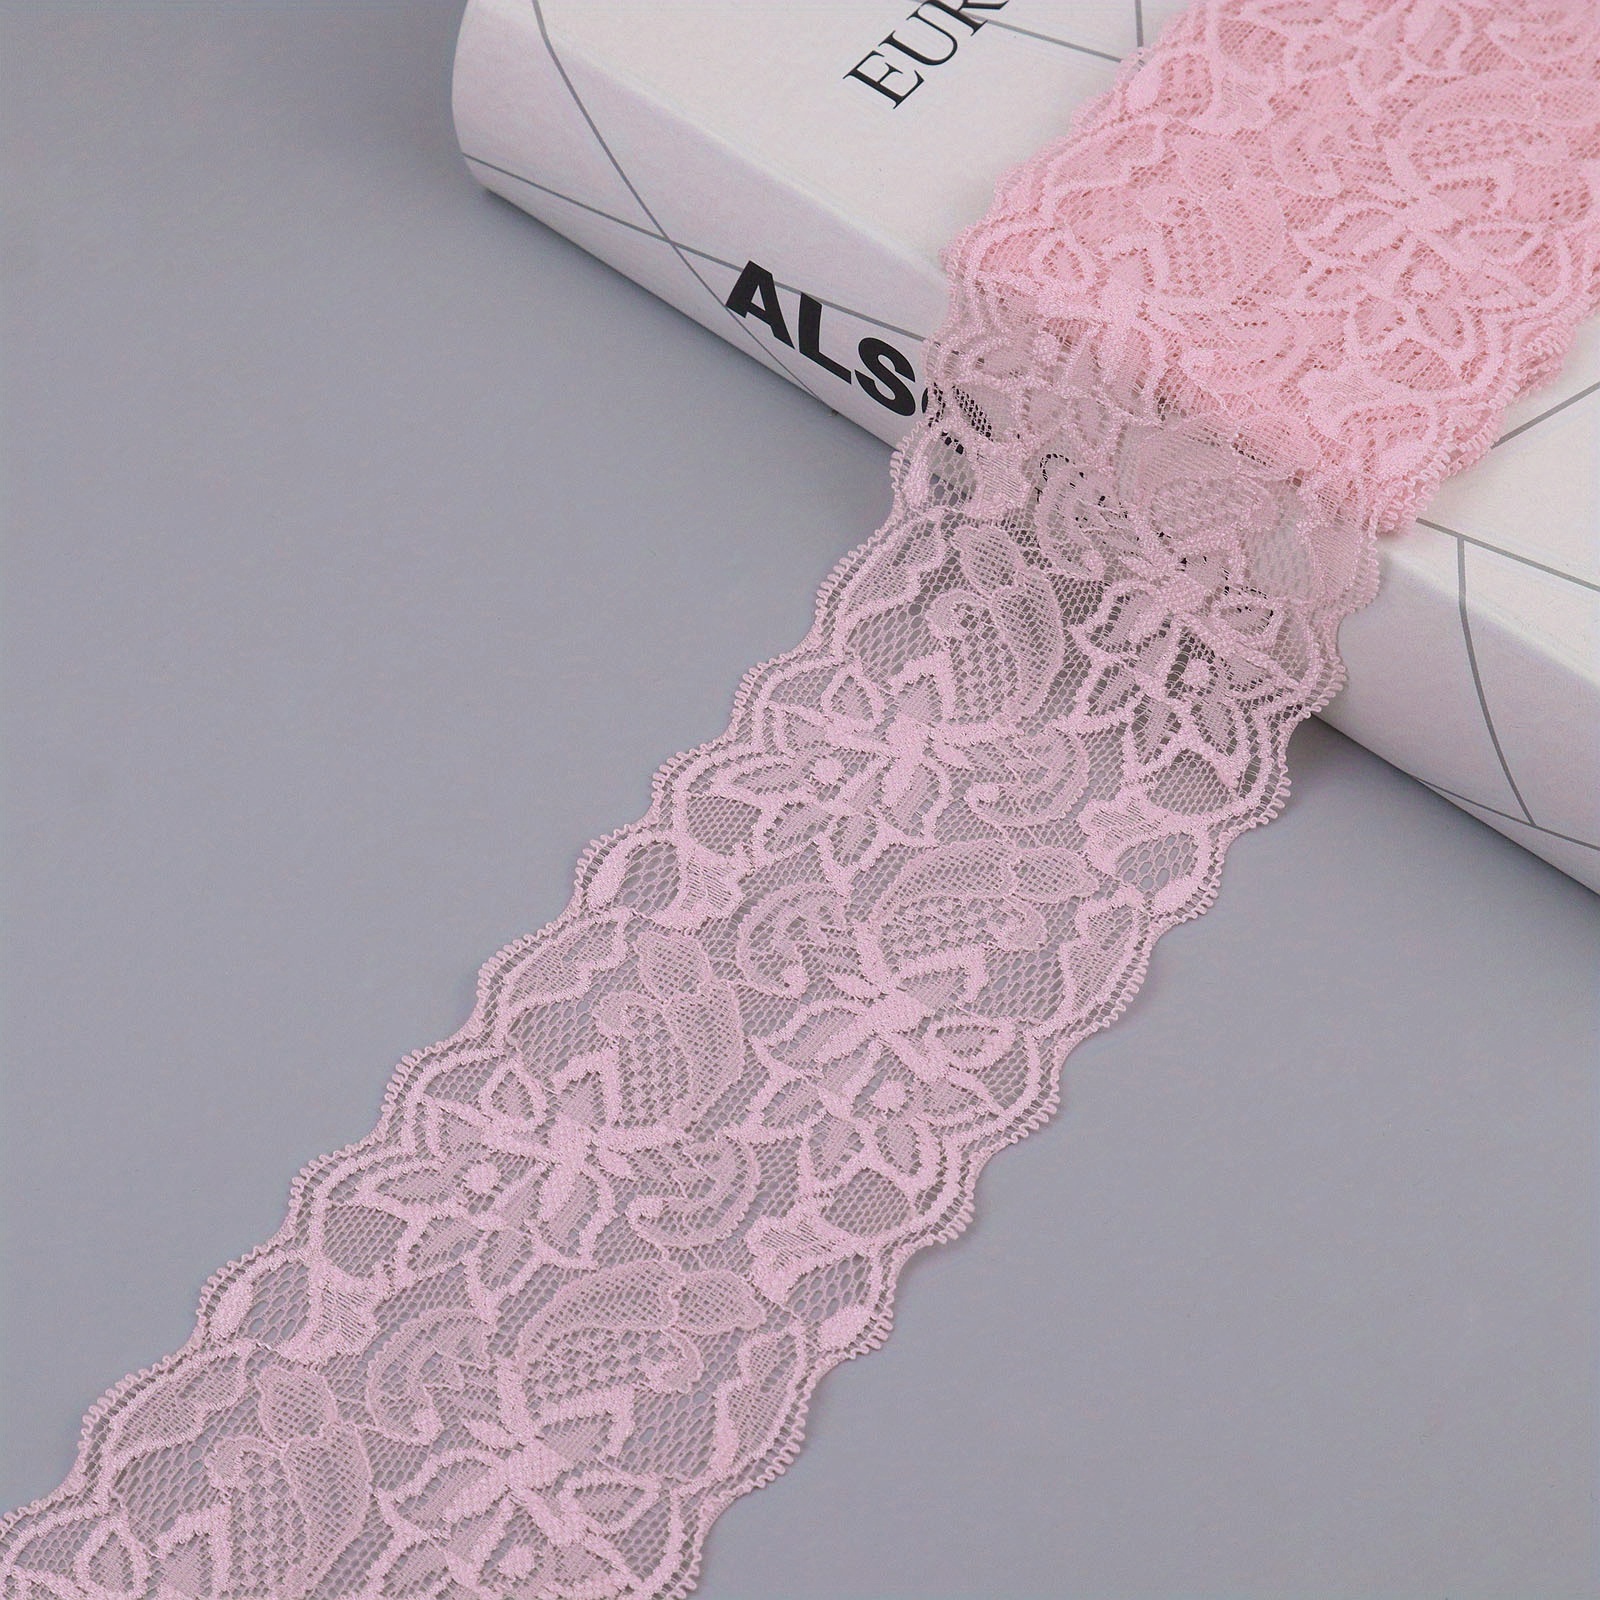 Lace Realm 1.5 Inch Wide White Stretch Floral Pattern Lace Ribbon Trim for  Sewing, Gift Package Wrapping, Floral Designing & Crafts-5 Yards (3603